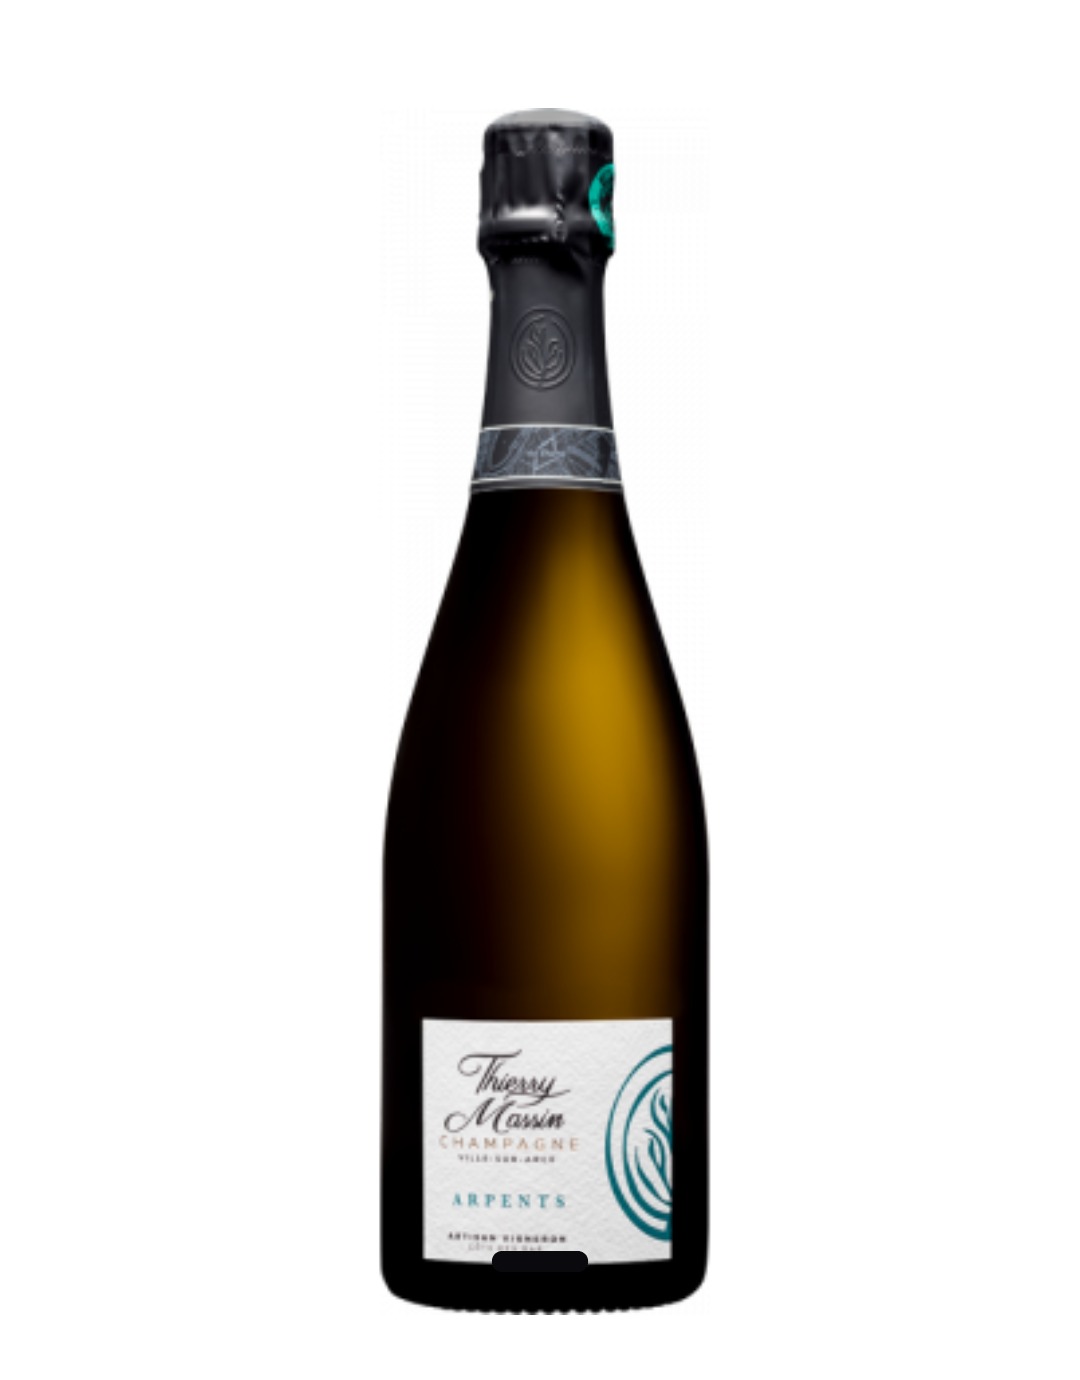 Thierry Massin - Arpents – Champagne Brut